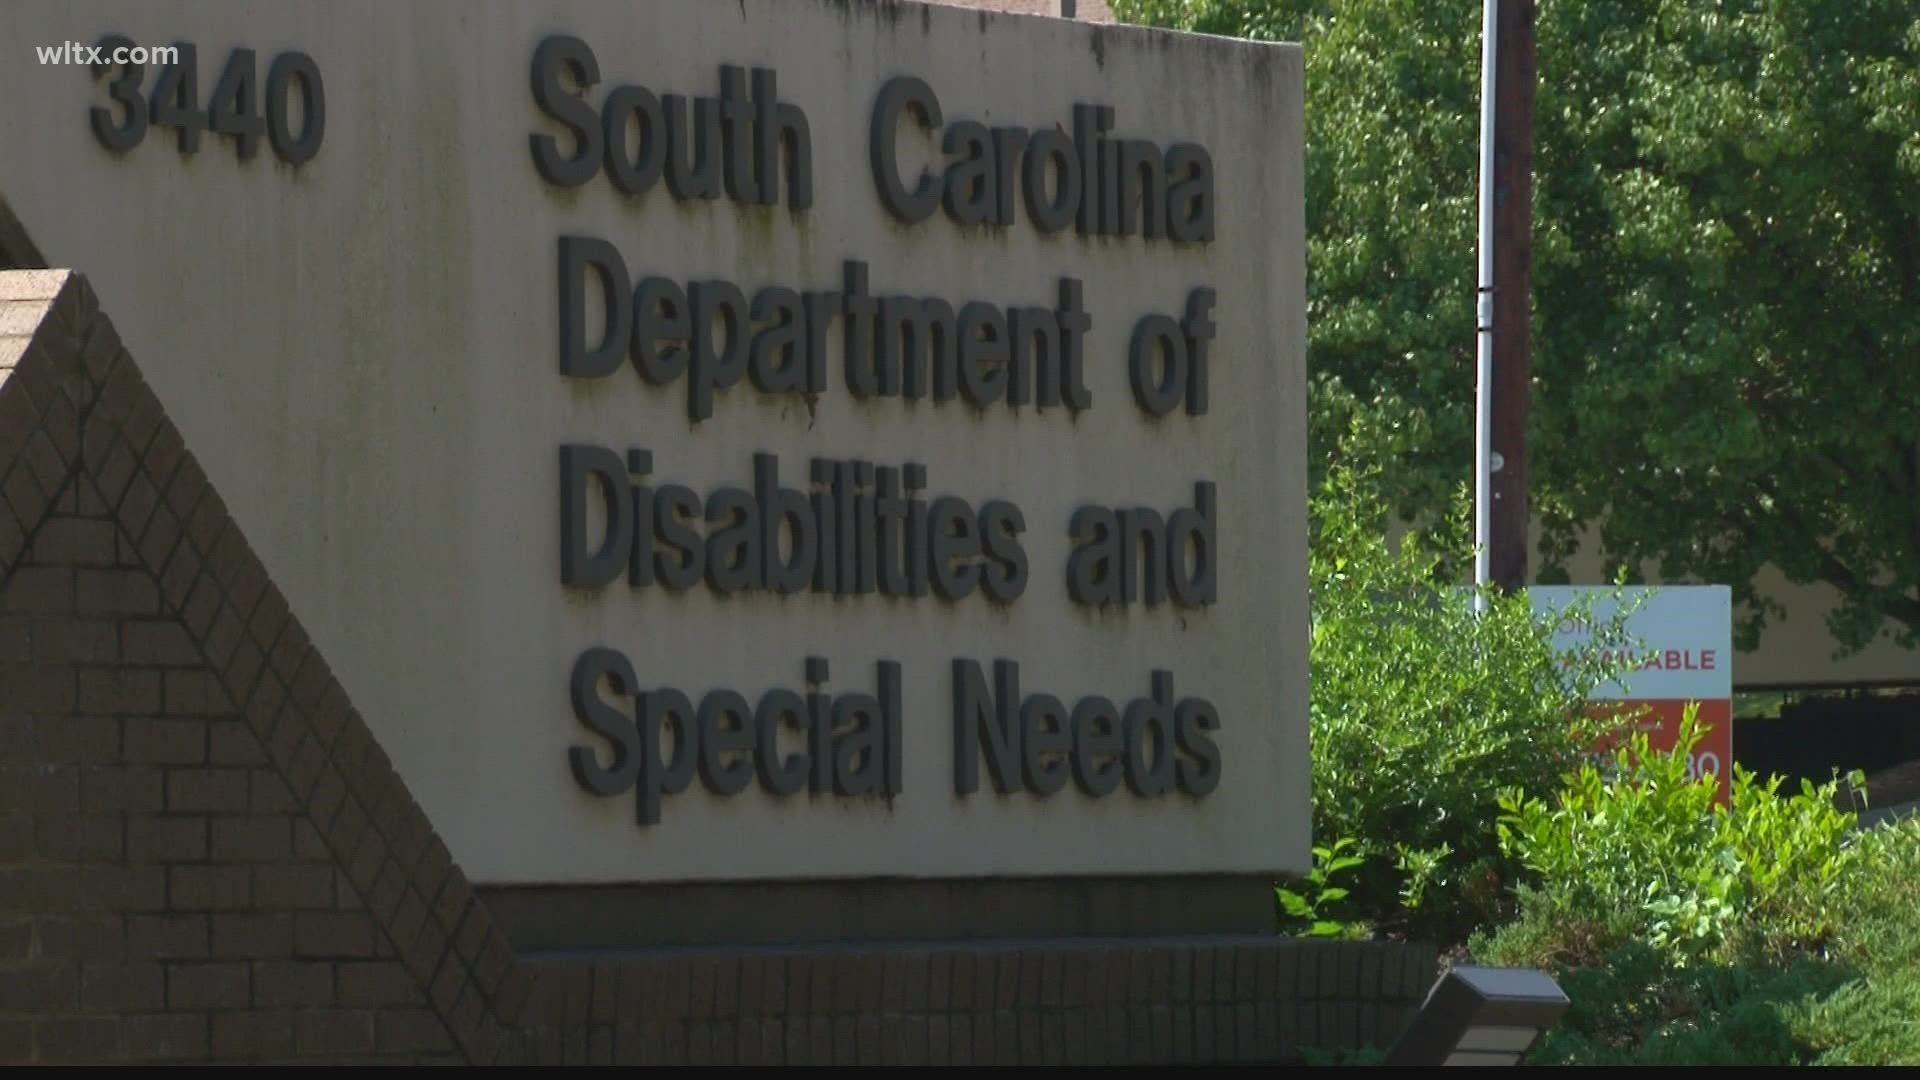 There's a new way for existing and new employees of the South Carolina Department of Disabilities and Special Needs (DDSN) to climb through the ranks faster.